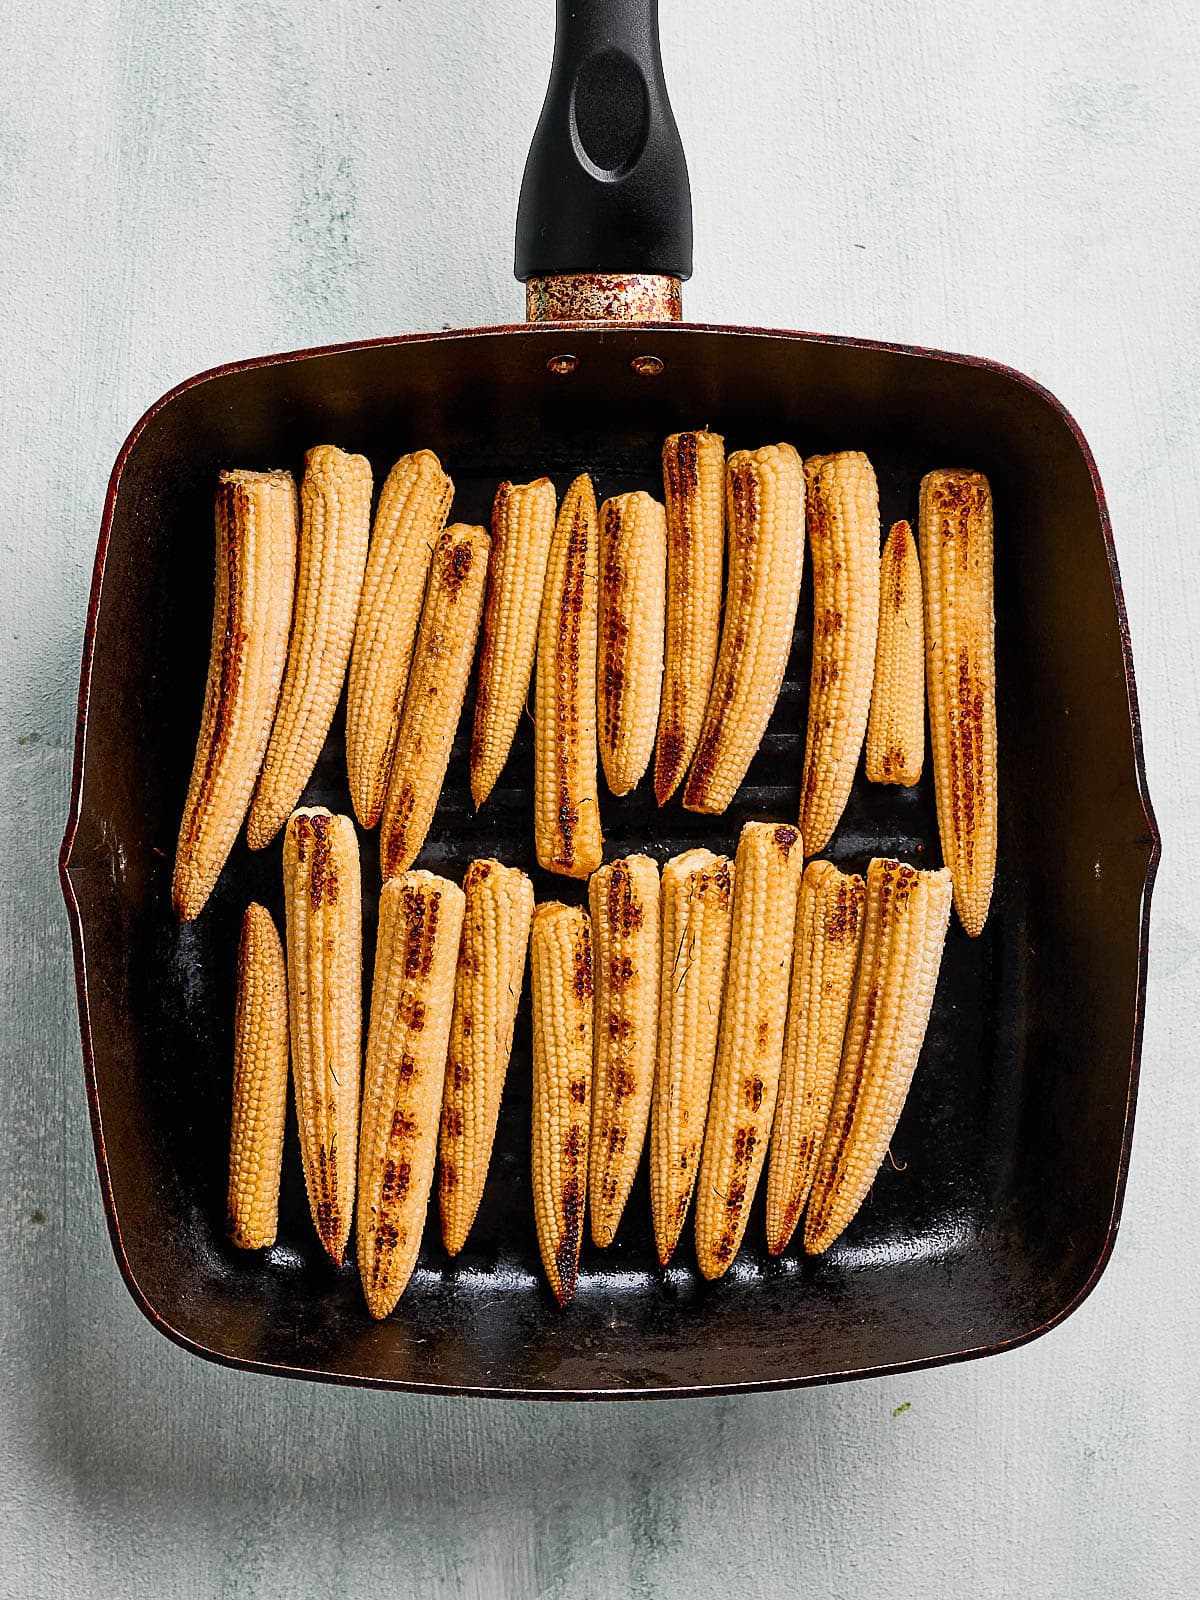 Baby corn in the griddle pan with char marks